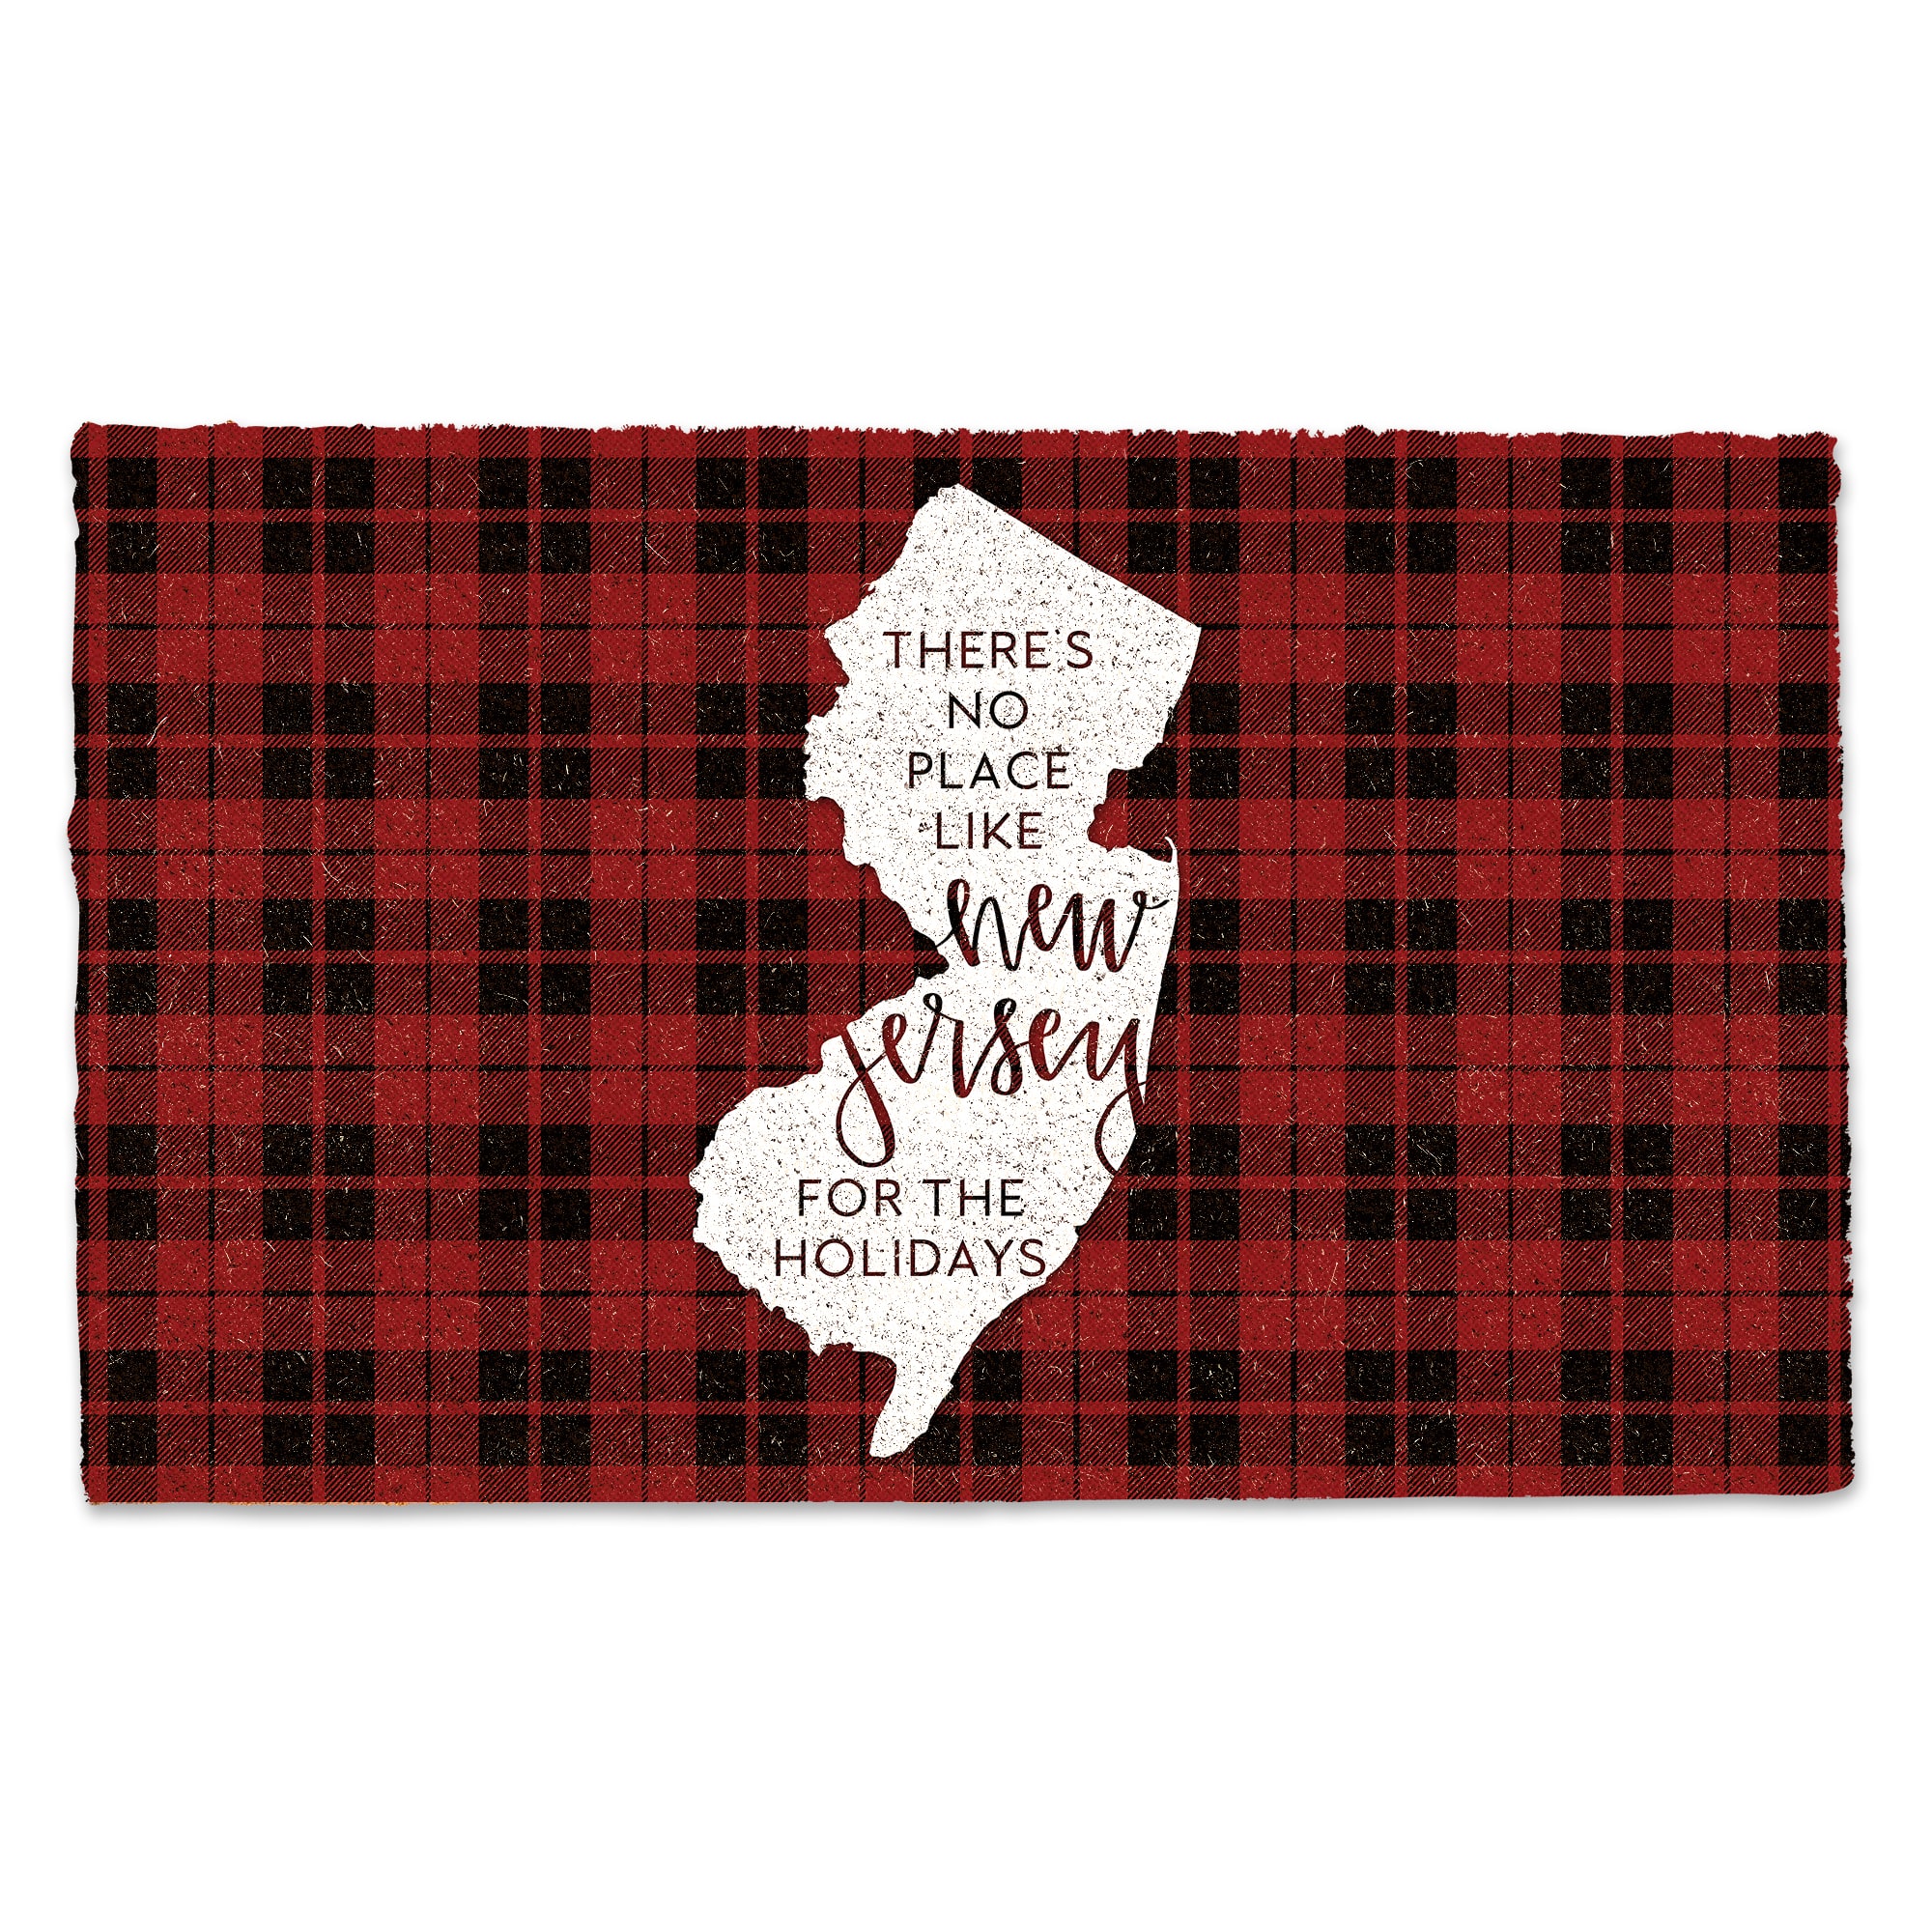 New Jersey for the Holidays Doormat